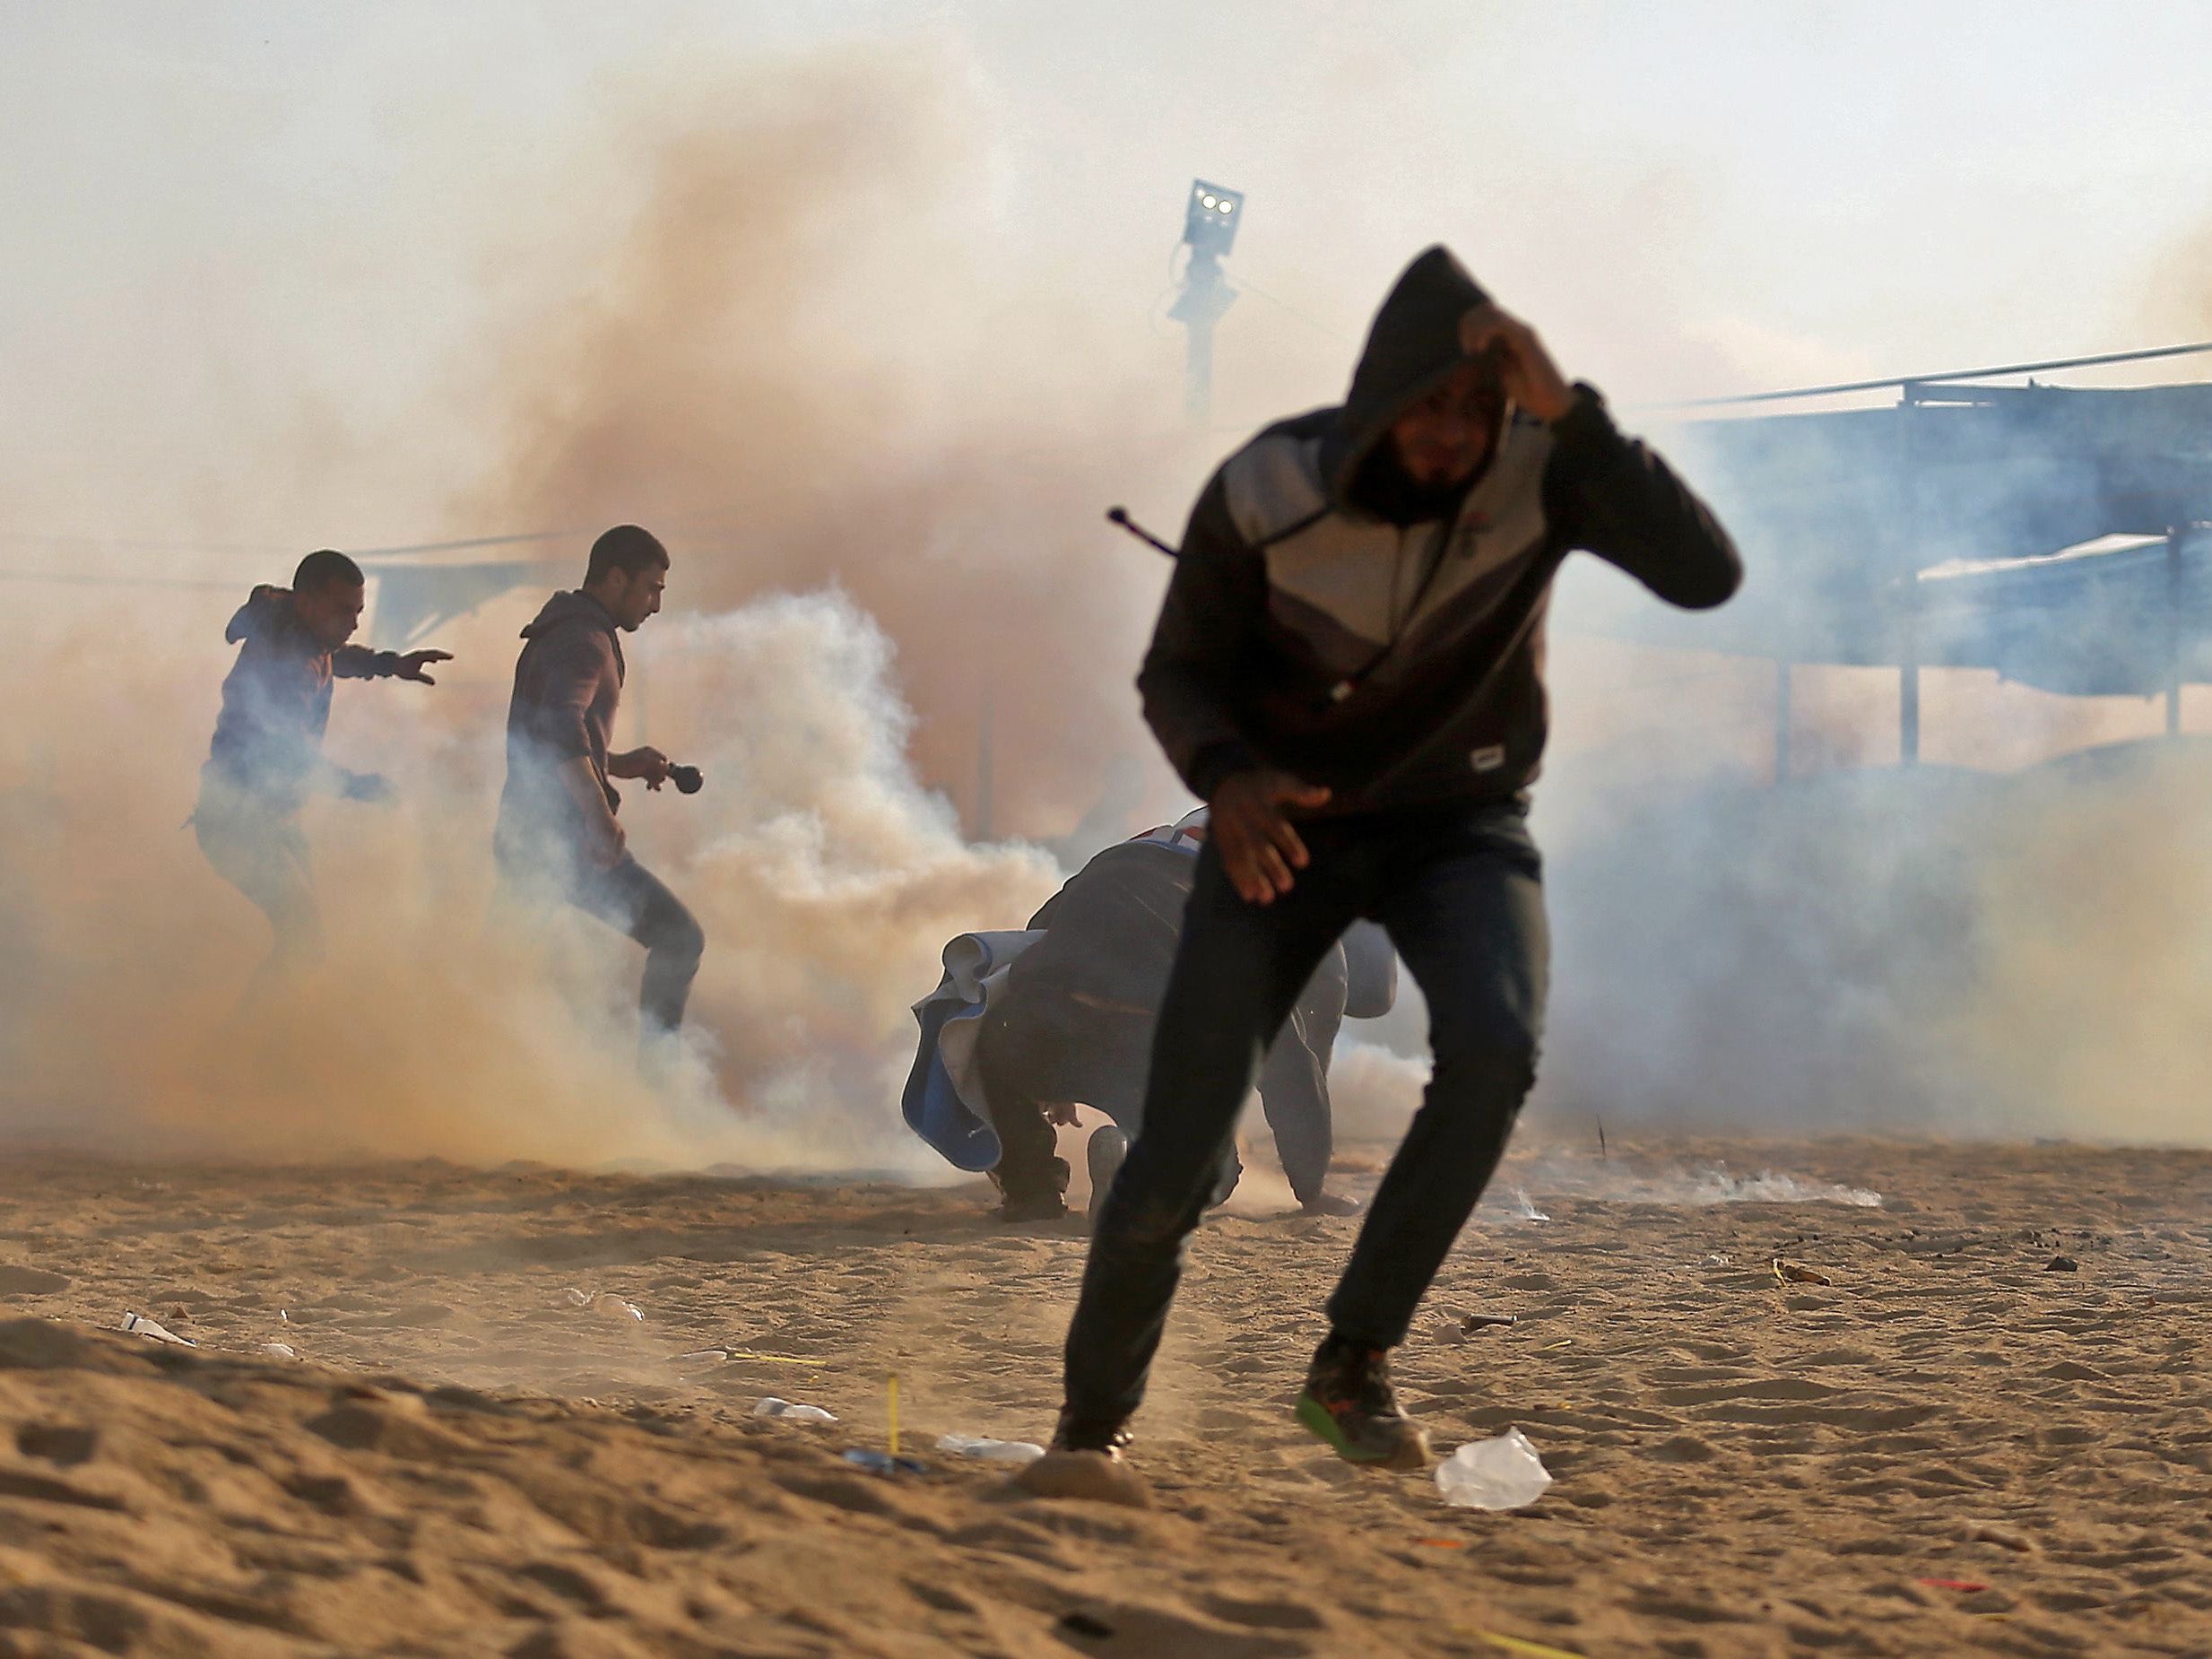 Gaza suffered its worst violence in years last week when Israeli forces shot and killed 60 people protesting both living conditions and the US embassy move